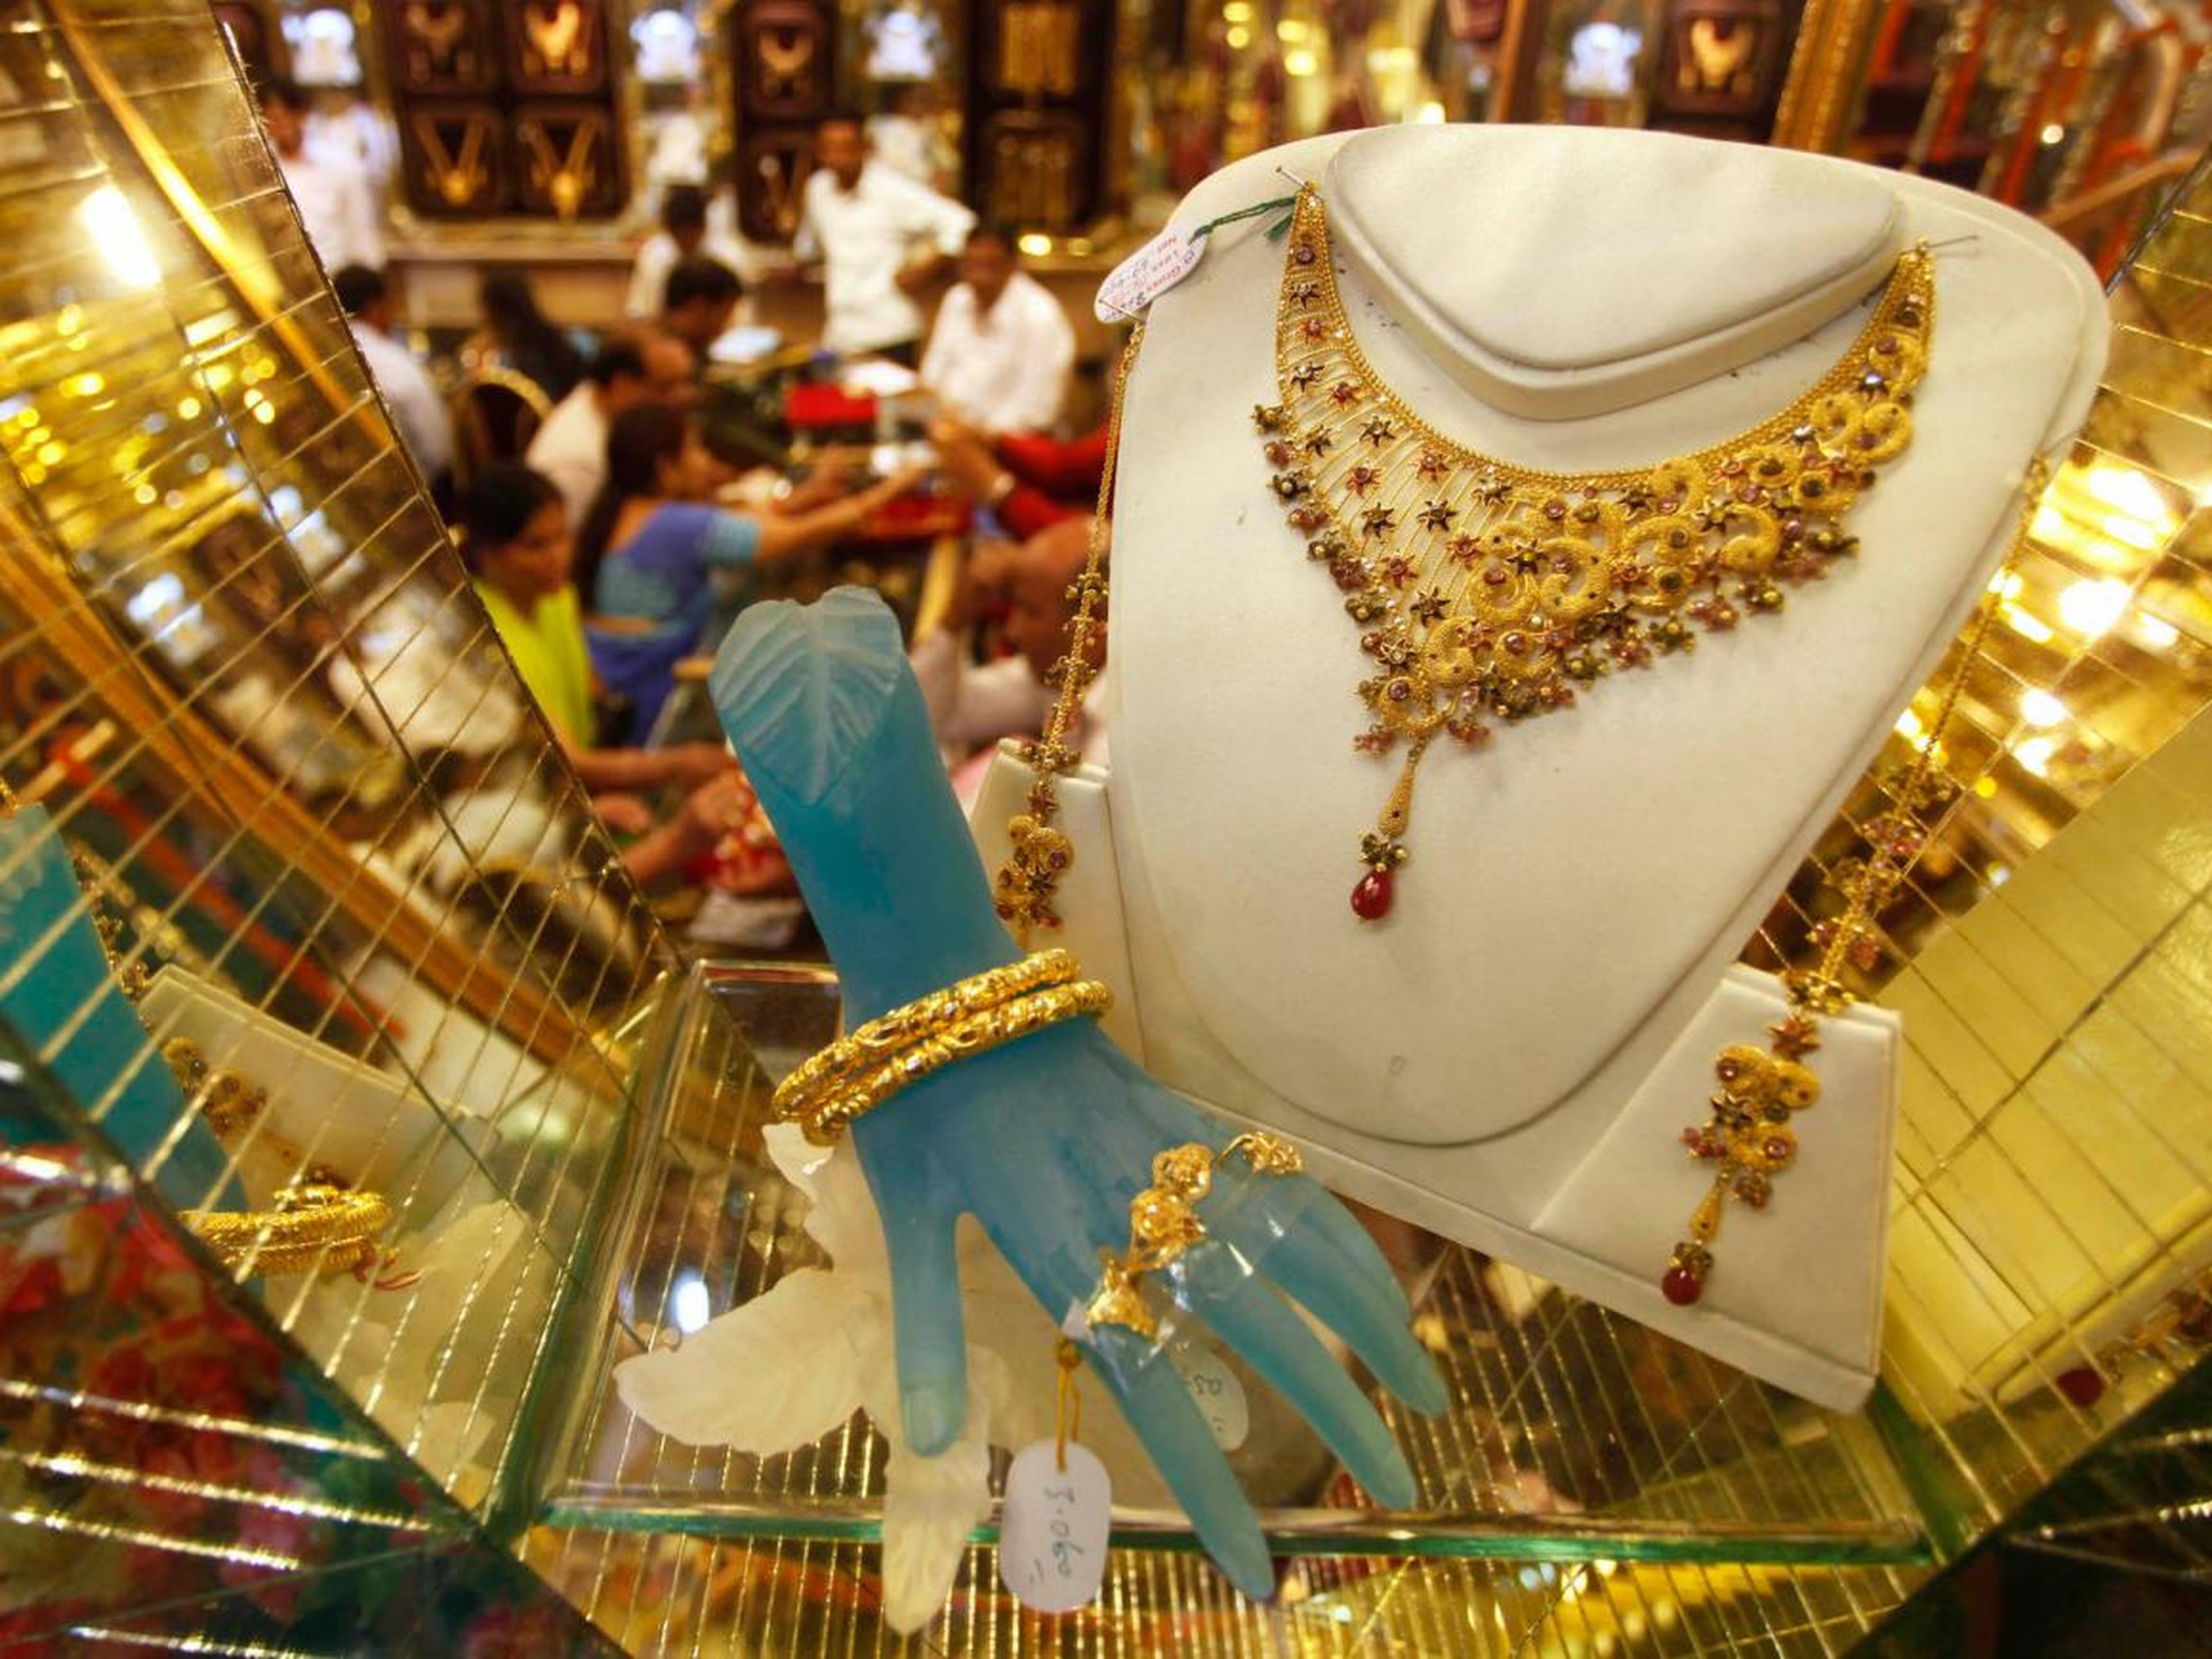 It's considered a sign of good fortune to purchase gold during Diwali.